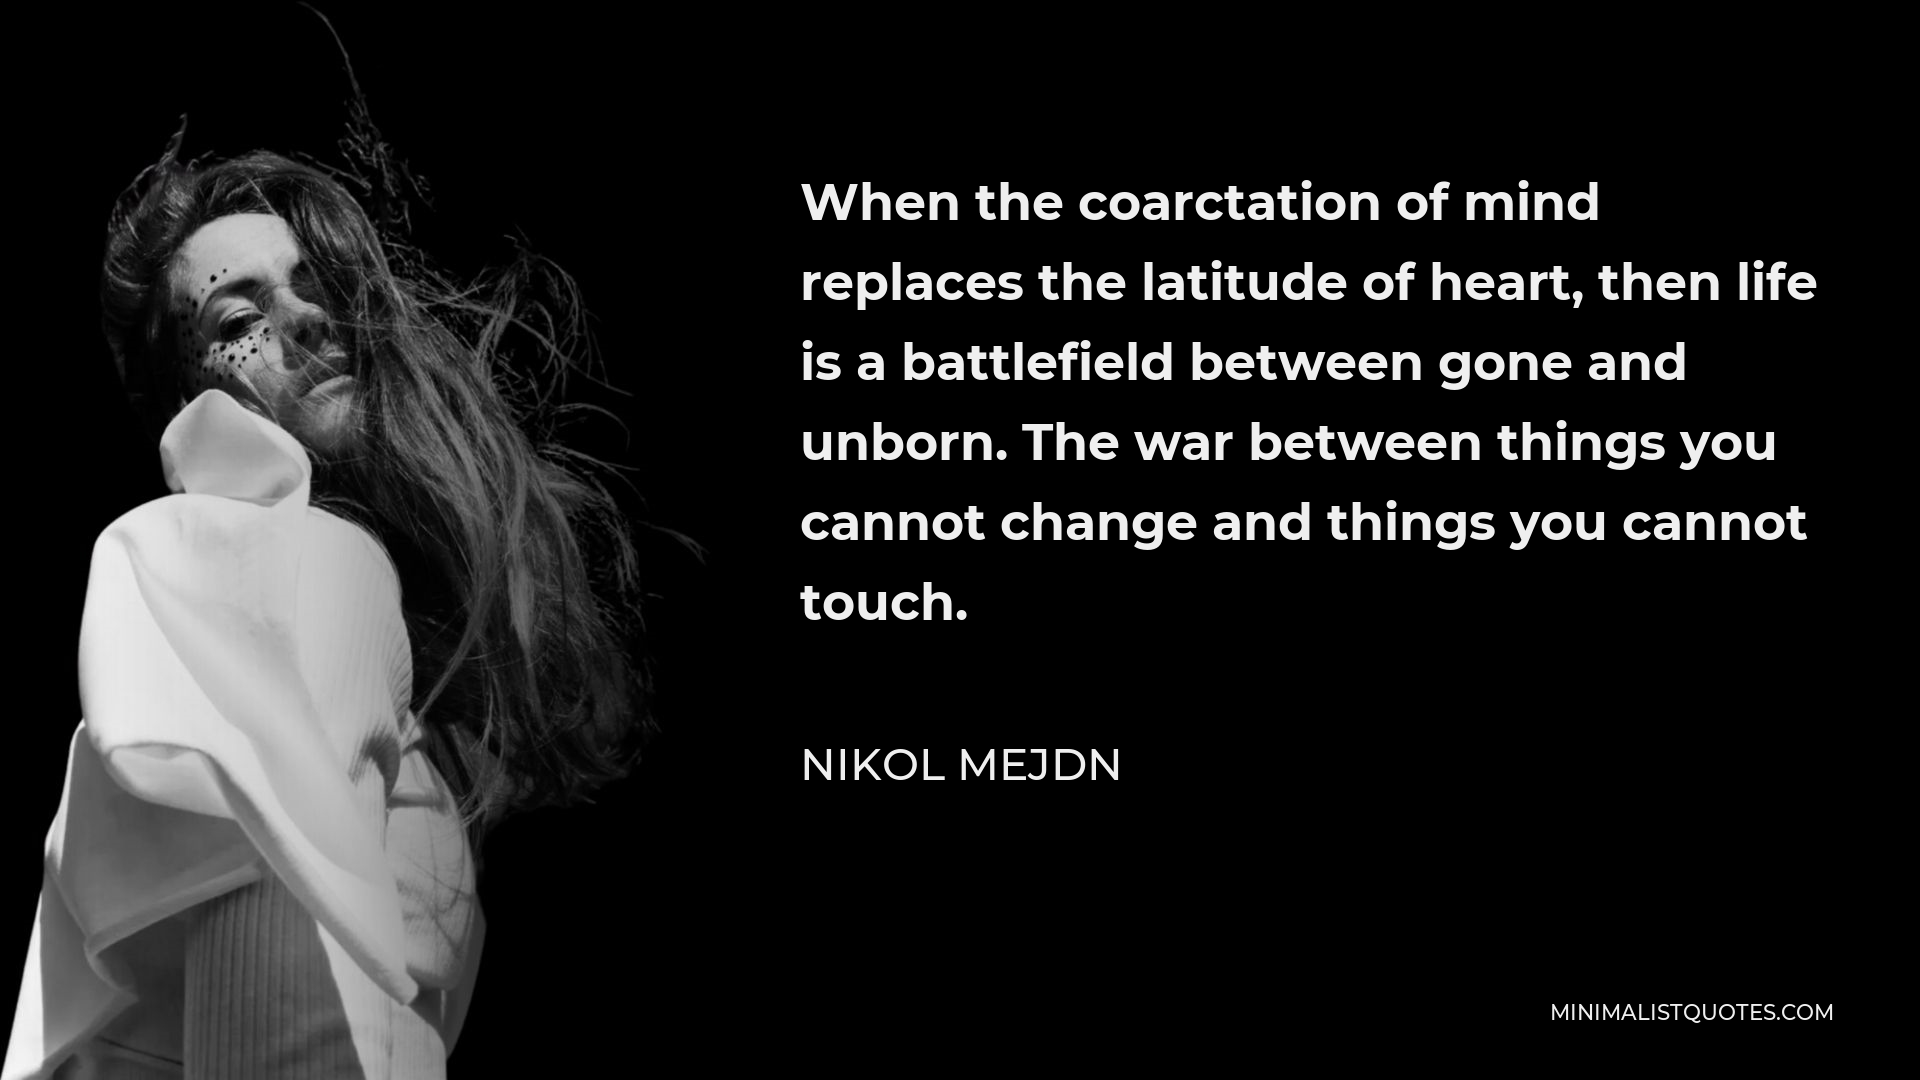 Nikol Mejdn Quote - When the coarctation of mind replaces the latitude of heart, then life is a battlefield between gone and unborn. The war between things you cannot change and things you cannot touch.